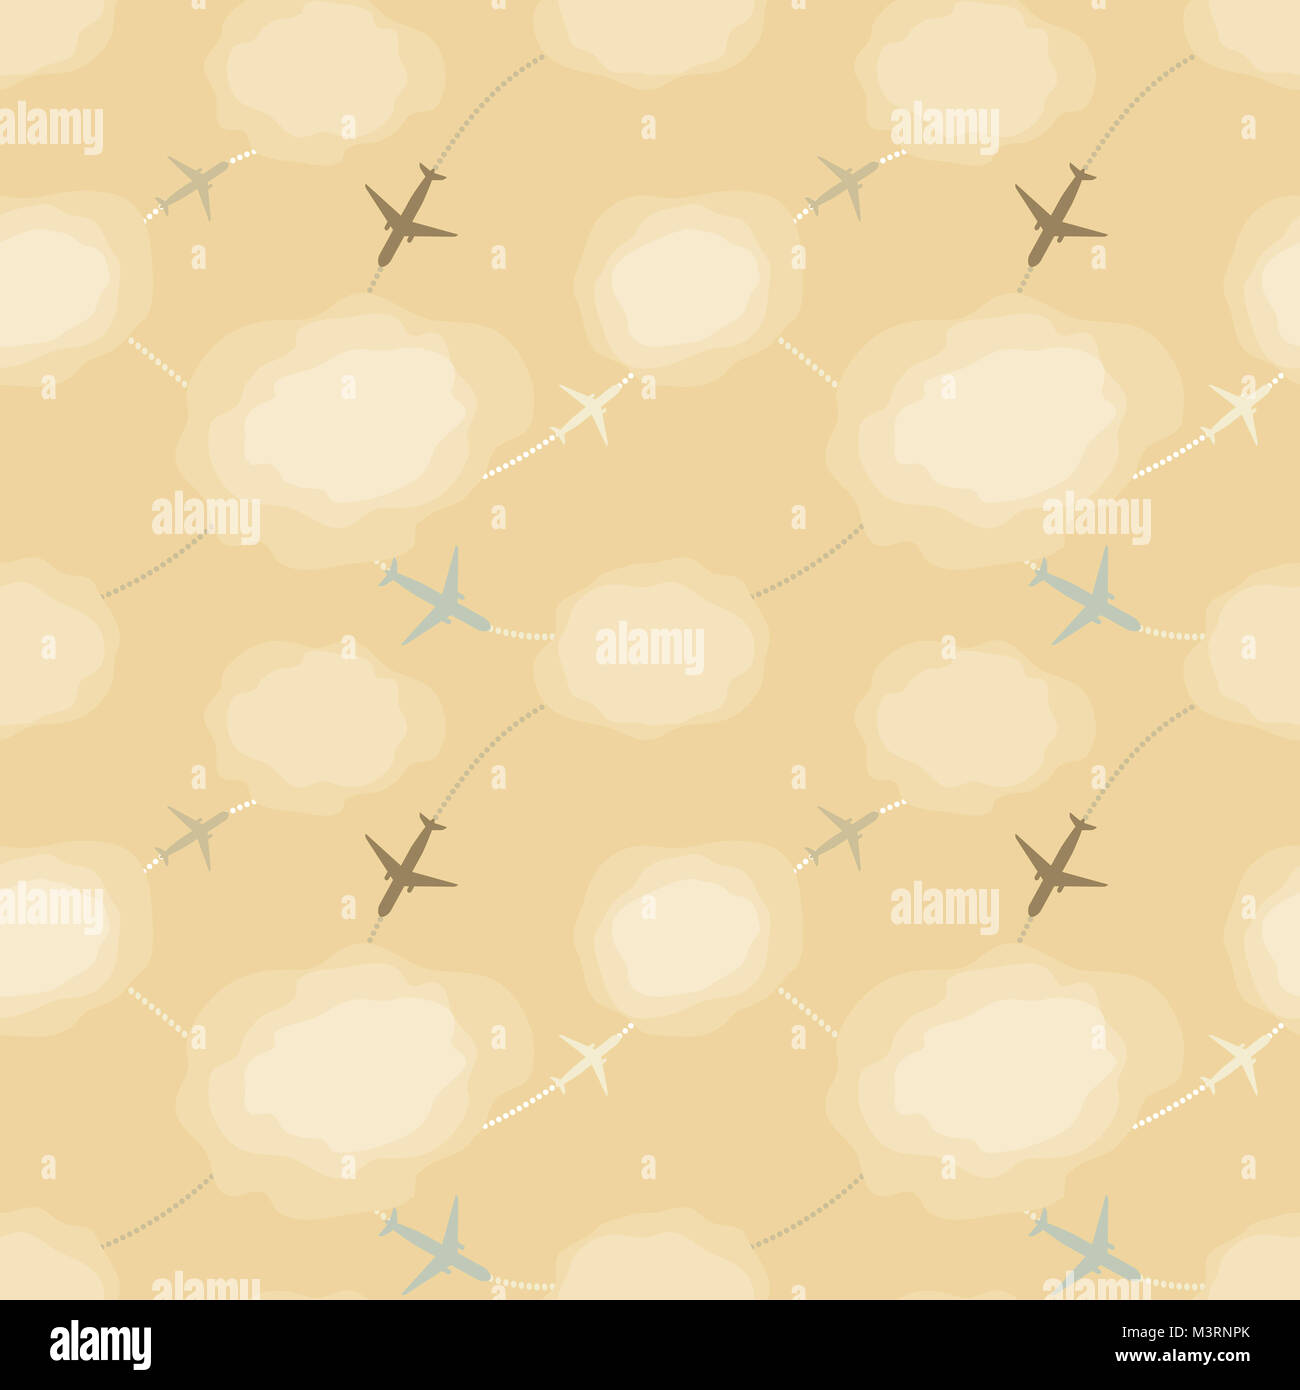 Beige seamless pattern with planes in the sky Stock Photo